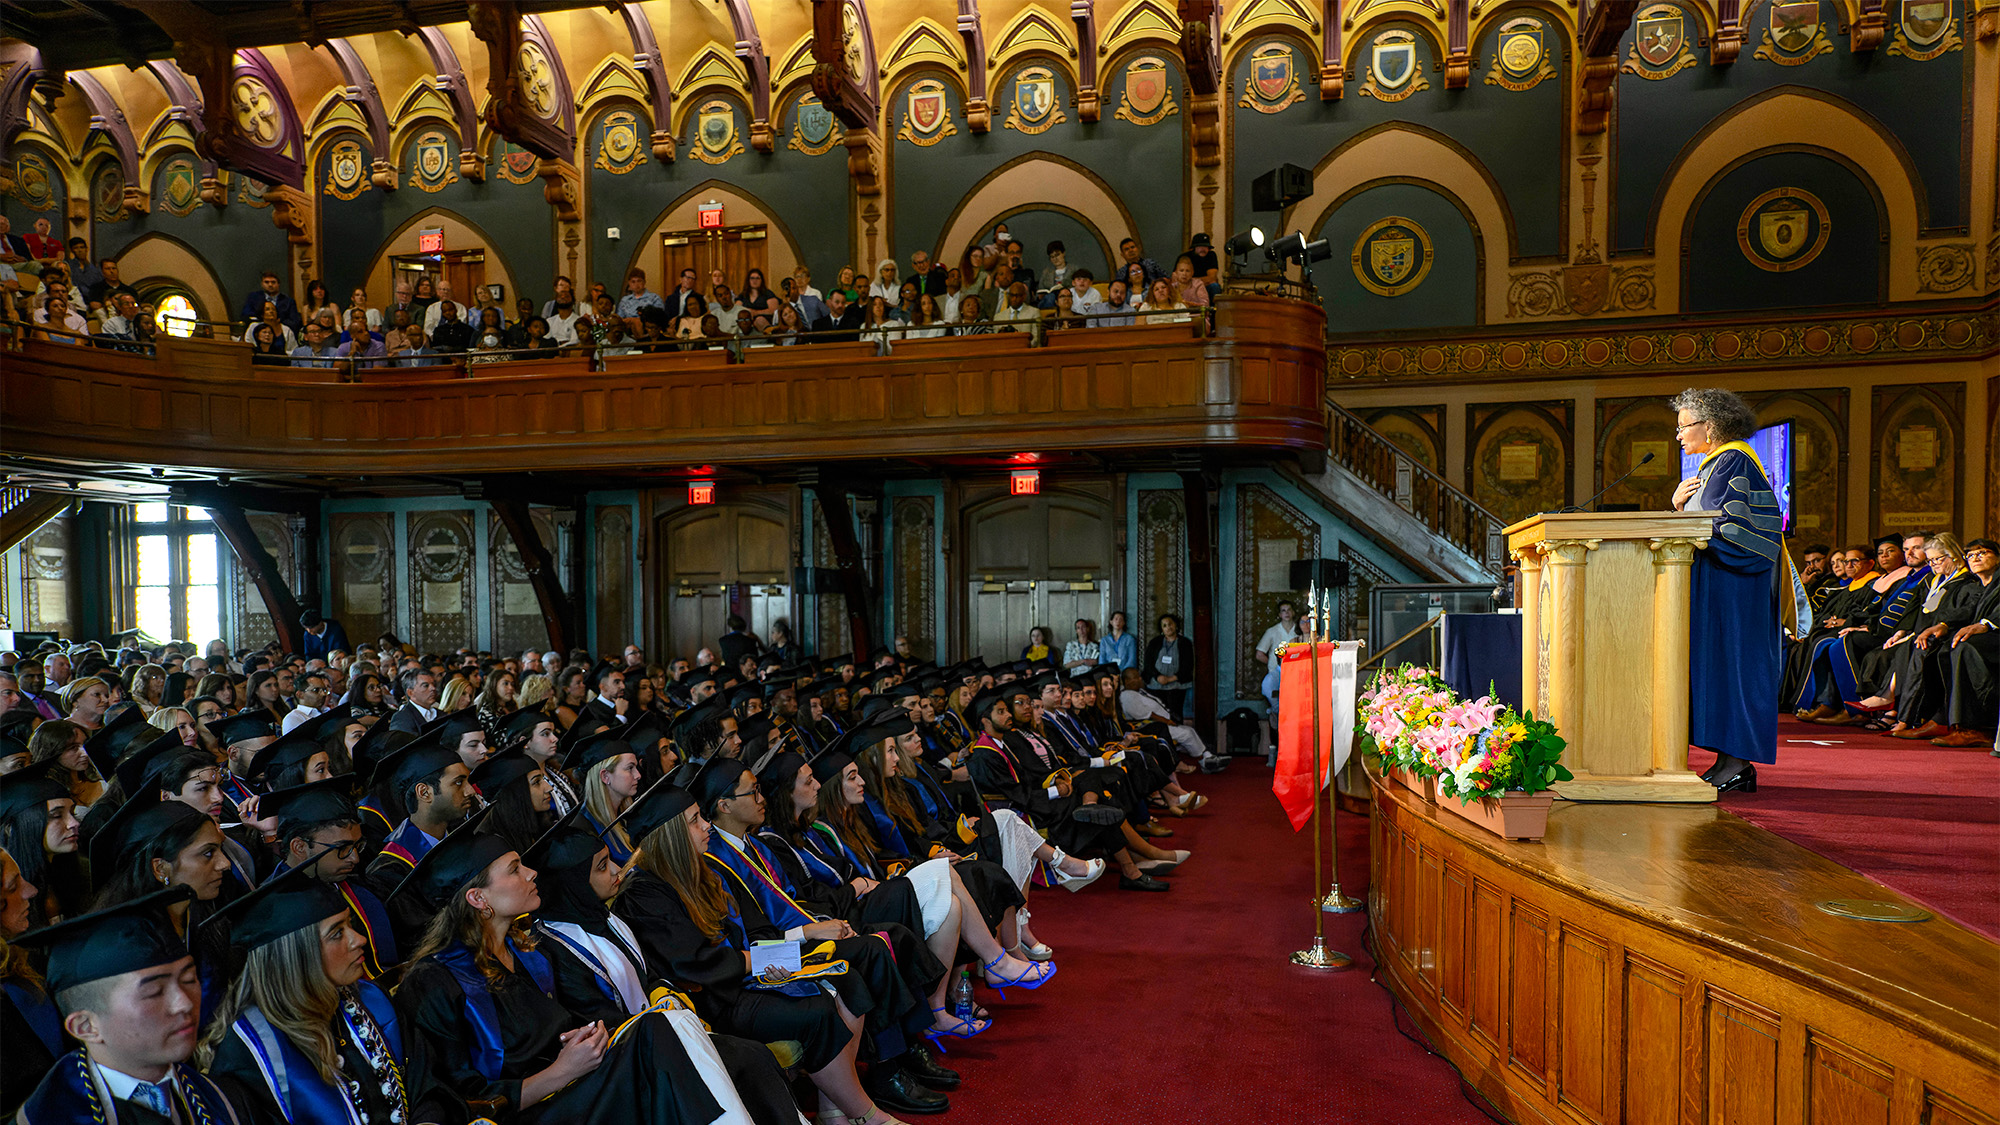 Graduates of the School of Health fill Gaston Hall while listening to commencement speakers on stage